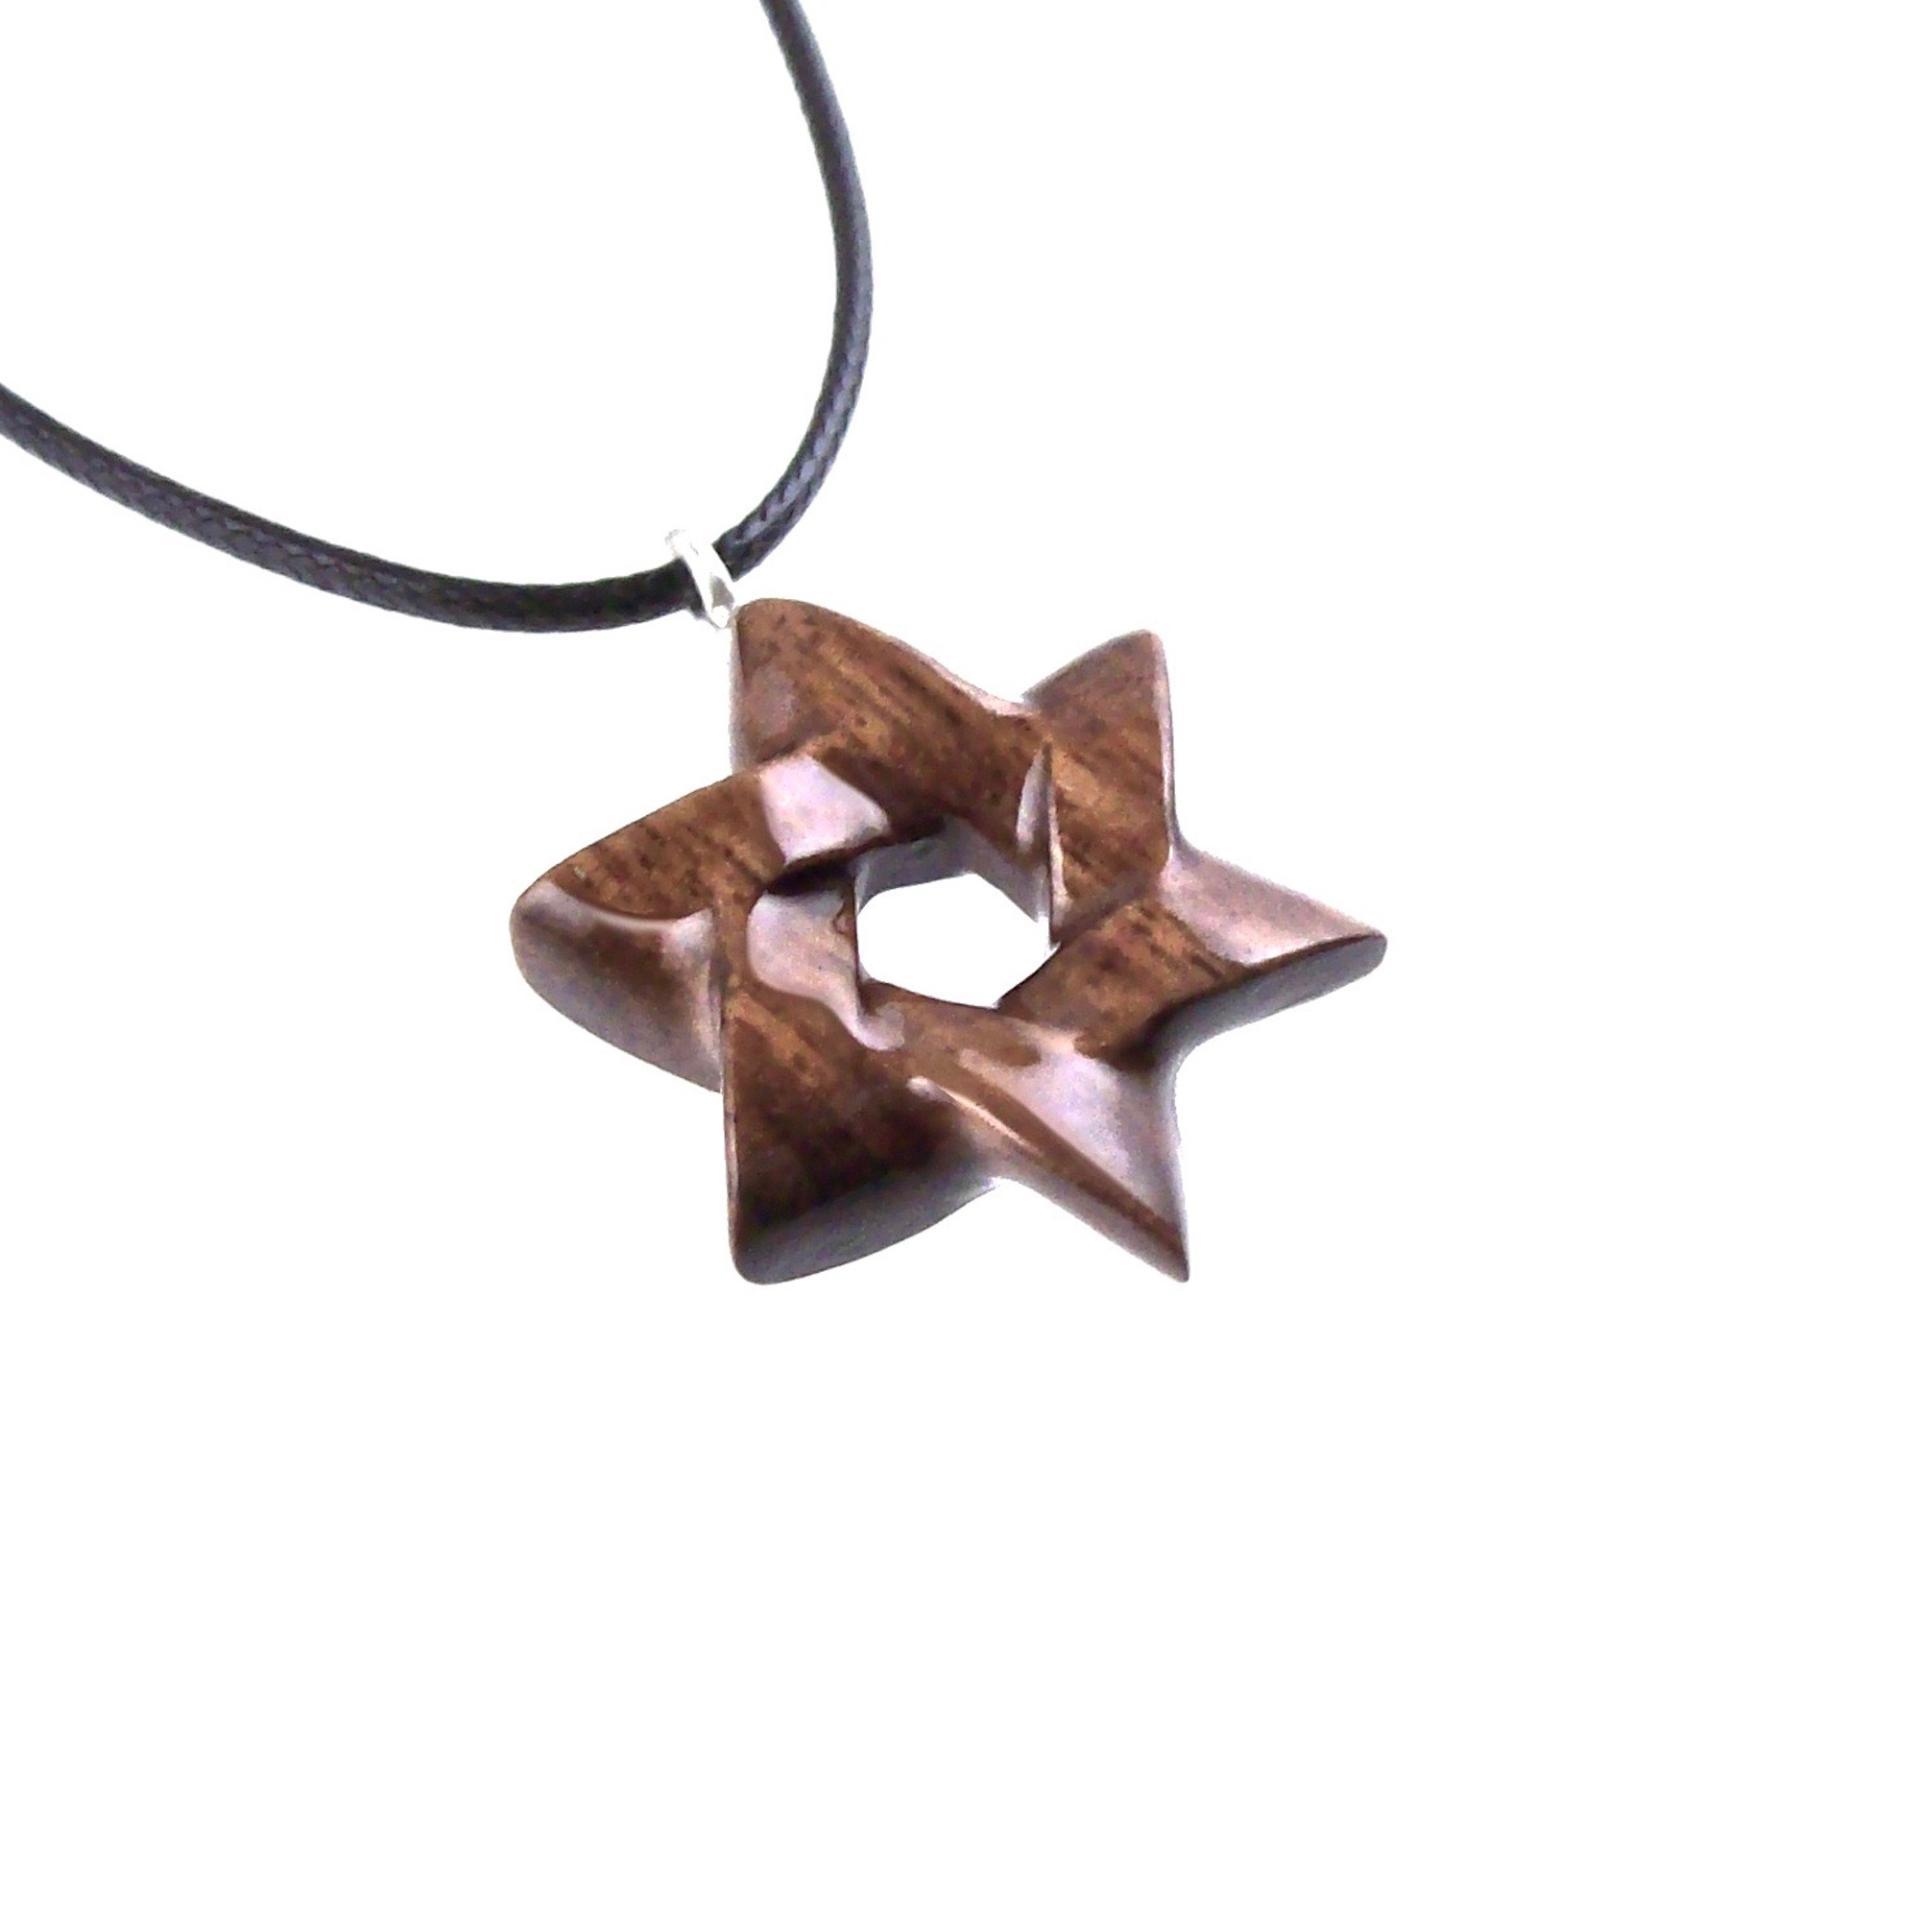 Hand Carved Wooden Star of David Pendant, Jewish Star Necklace for Men or Women, Wood Jewish Jewelry